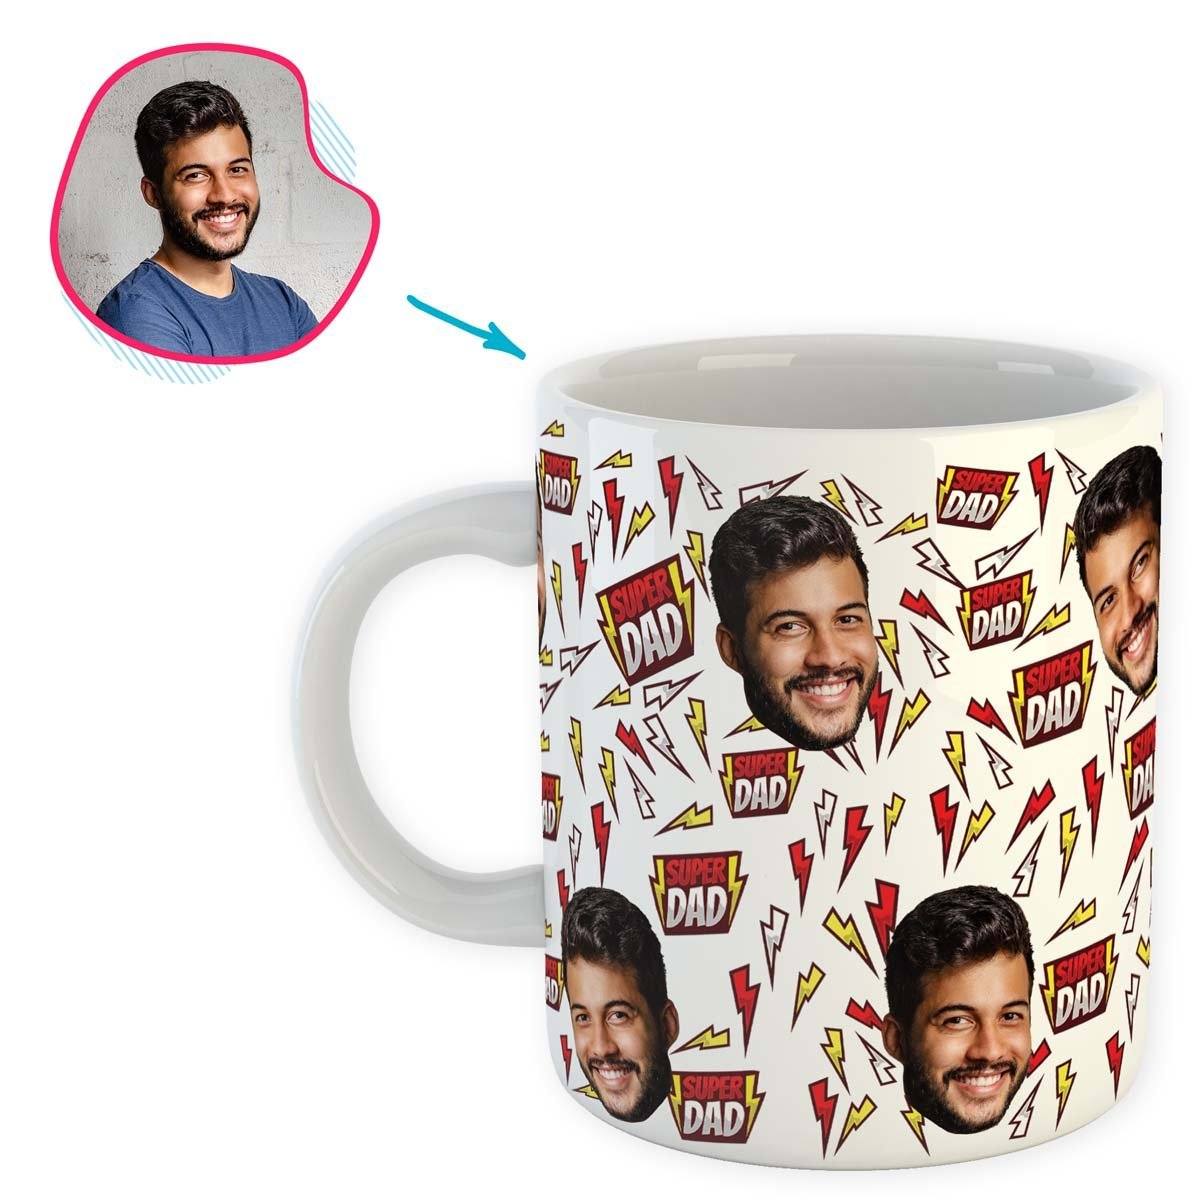 white Super Dad mug personalized with photo of face printed on it